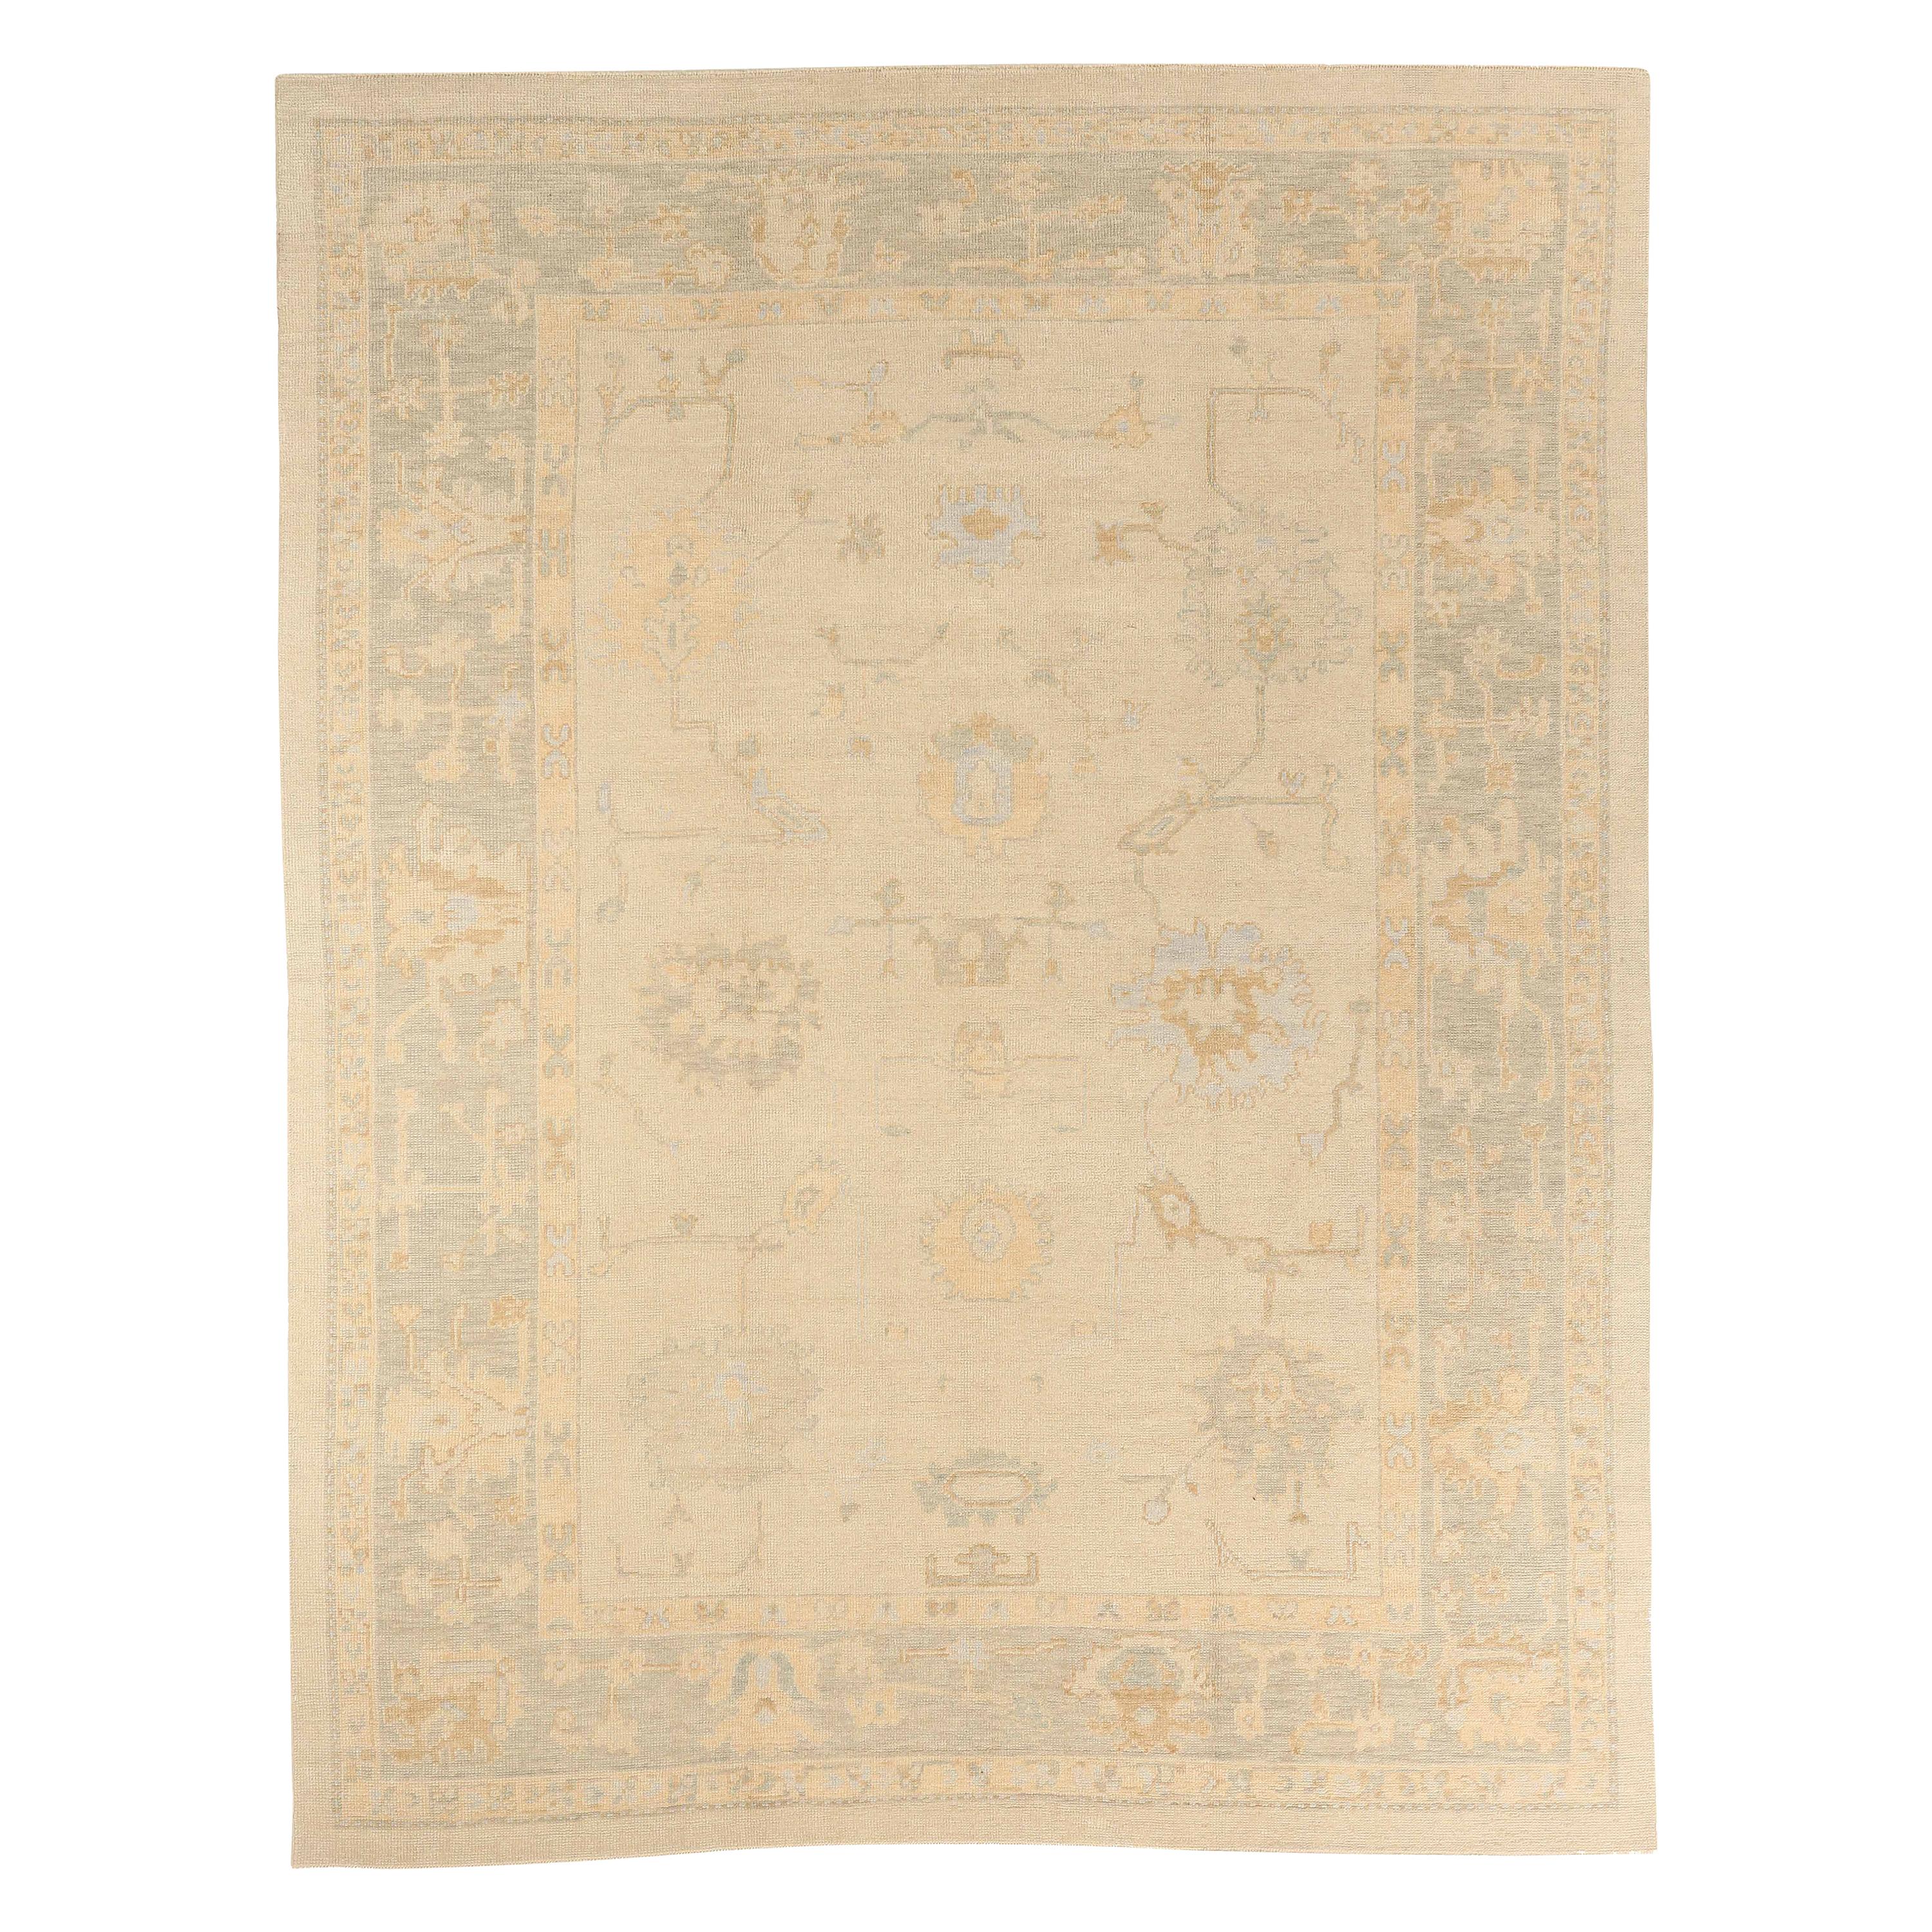 Contemporary Turkish Oushak Rug with Gray and Brown Floral Details For Sale